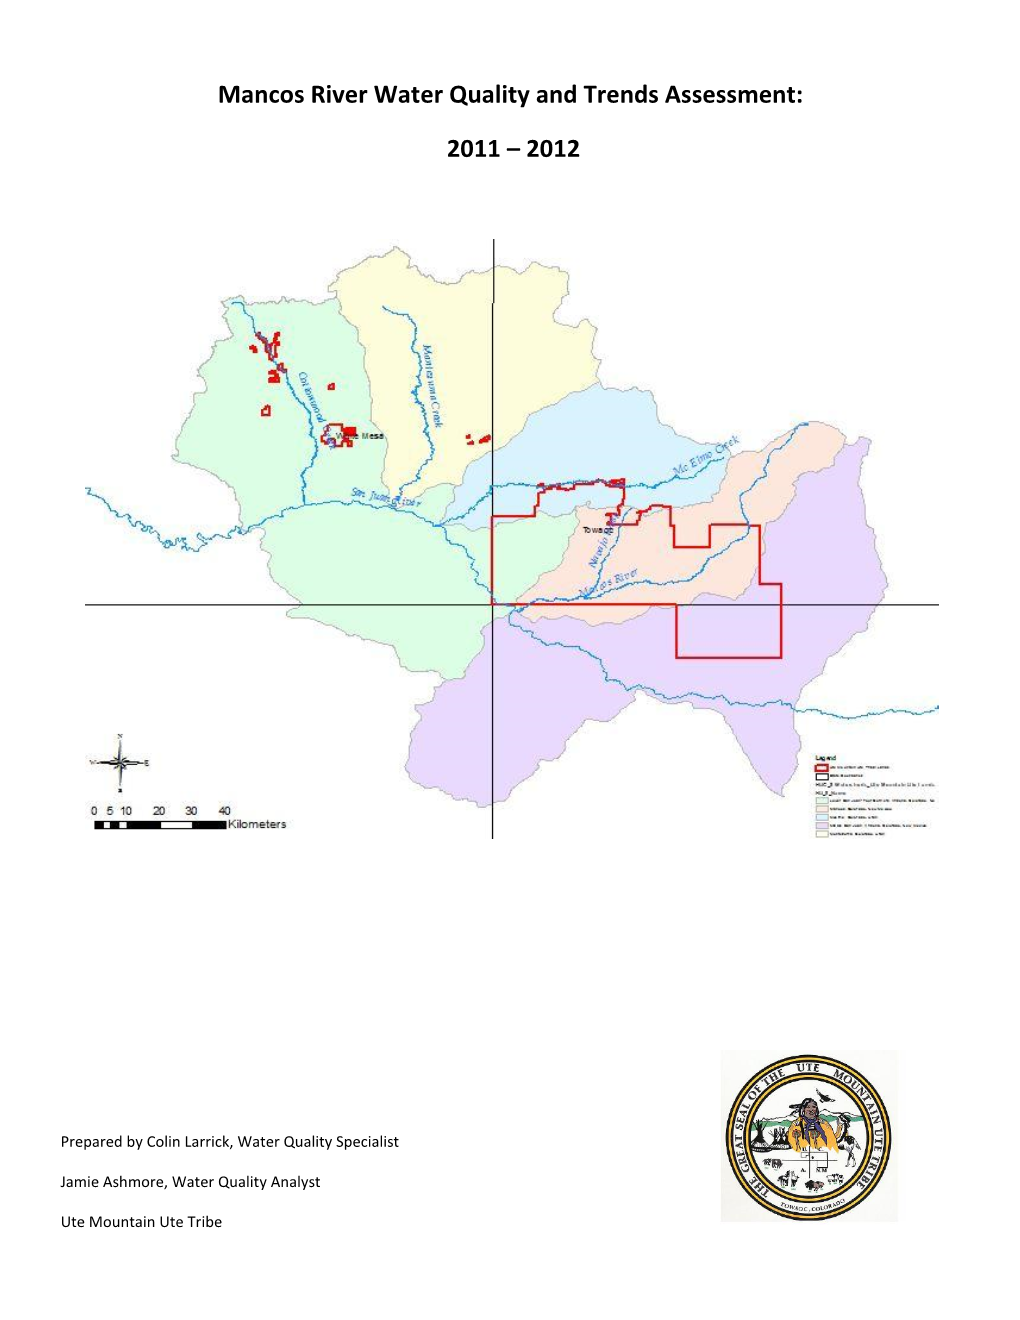 Mancos River Water Quality and Trends Assessment: 2011 – 2012